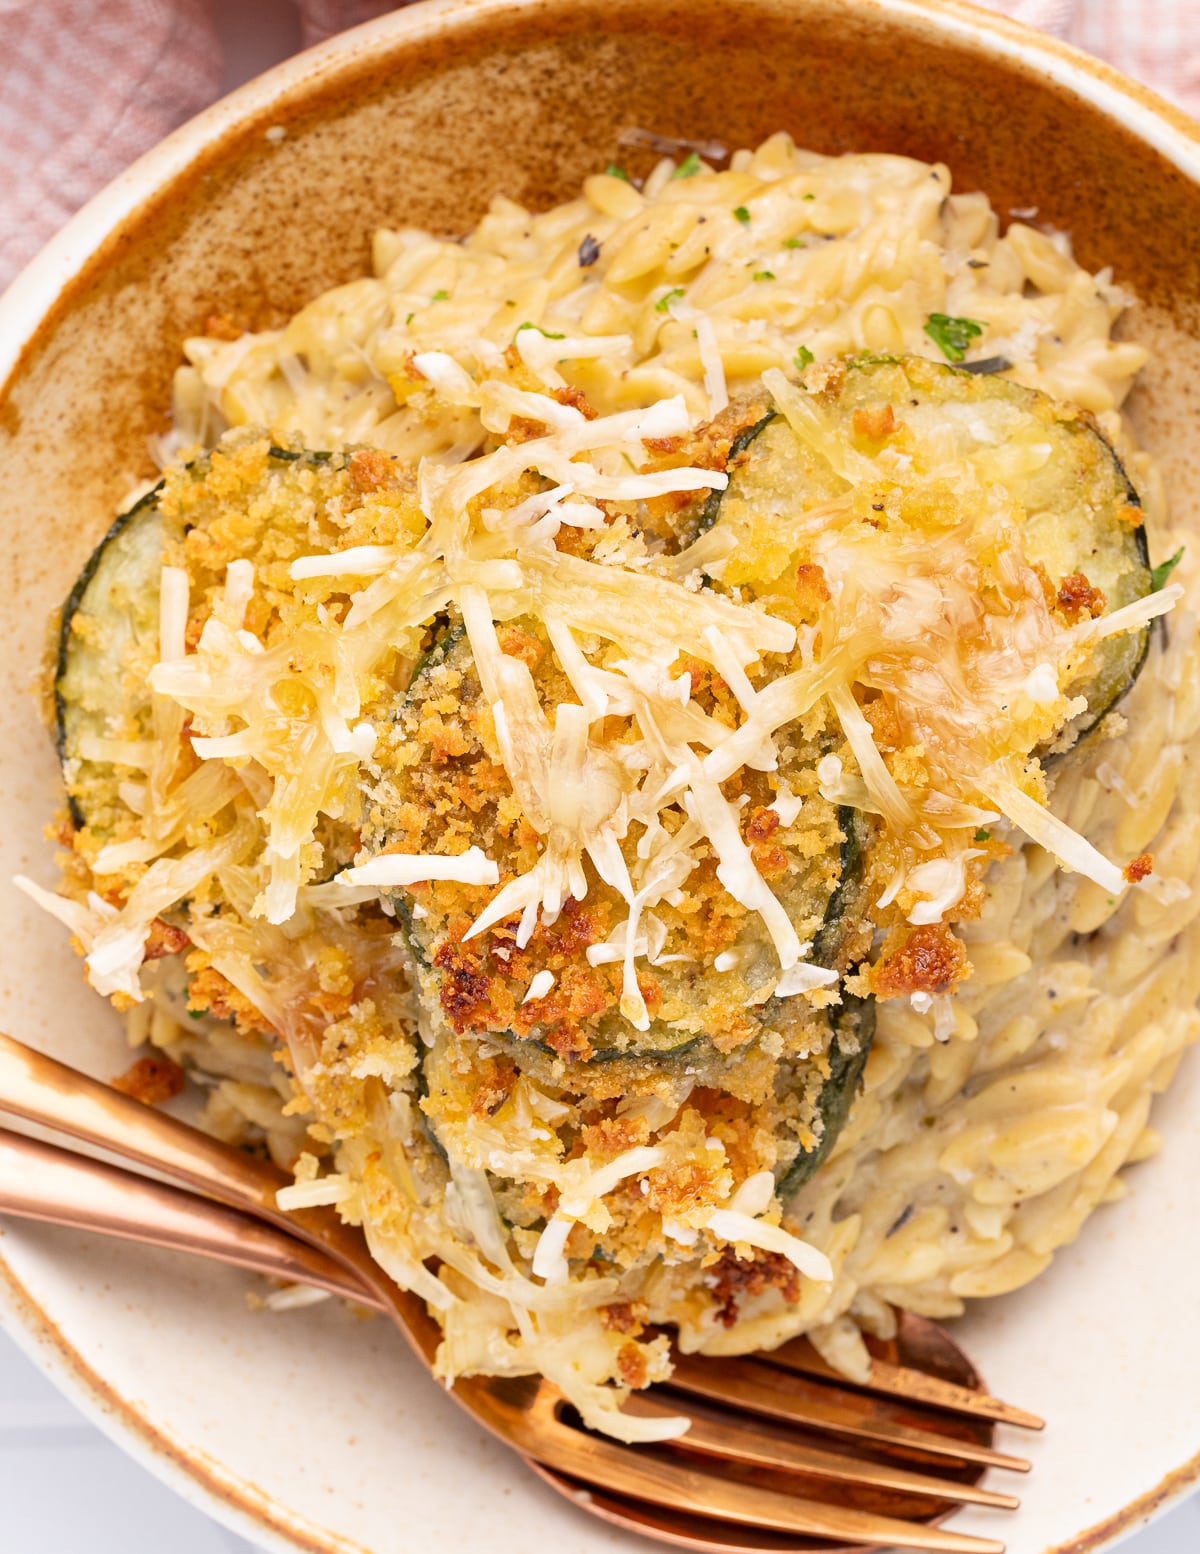 crispy bake zucchini slices on a bowl of orzo risotto